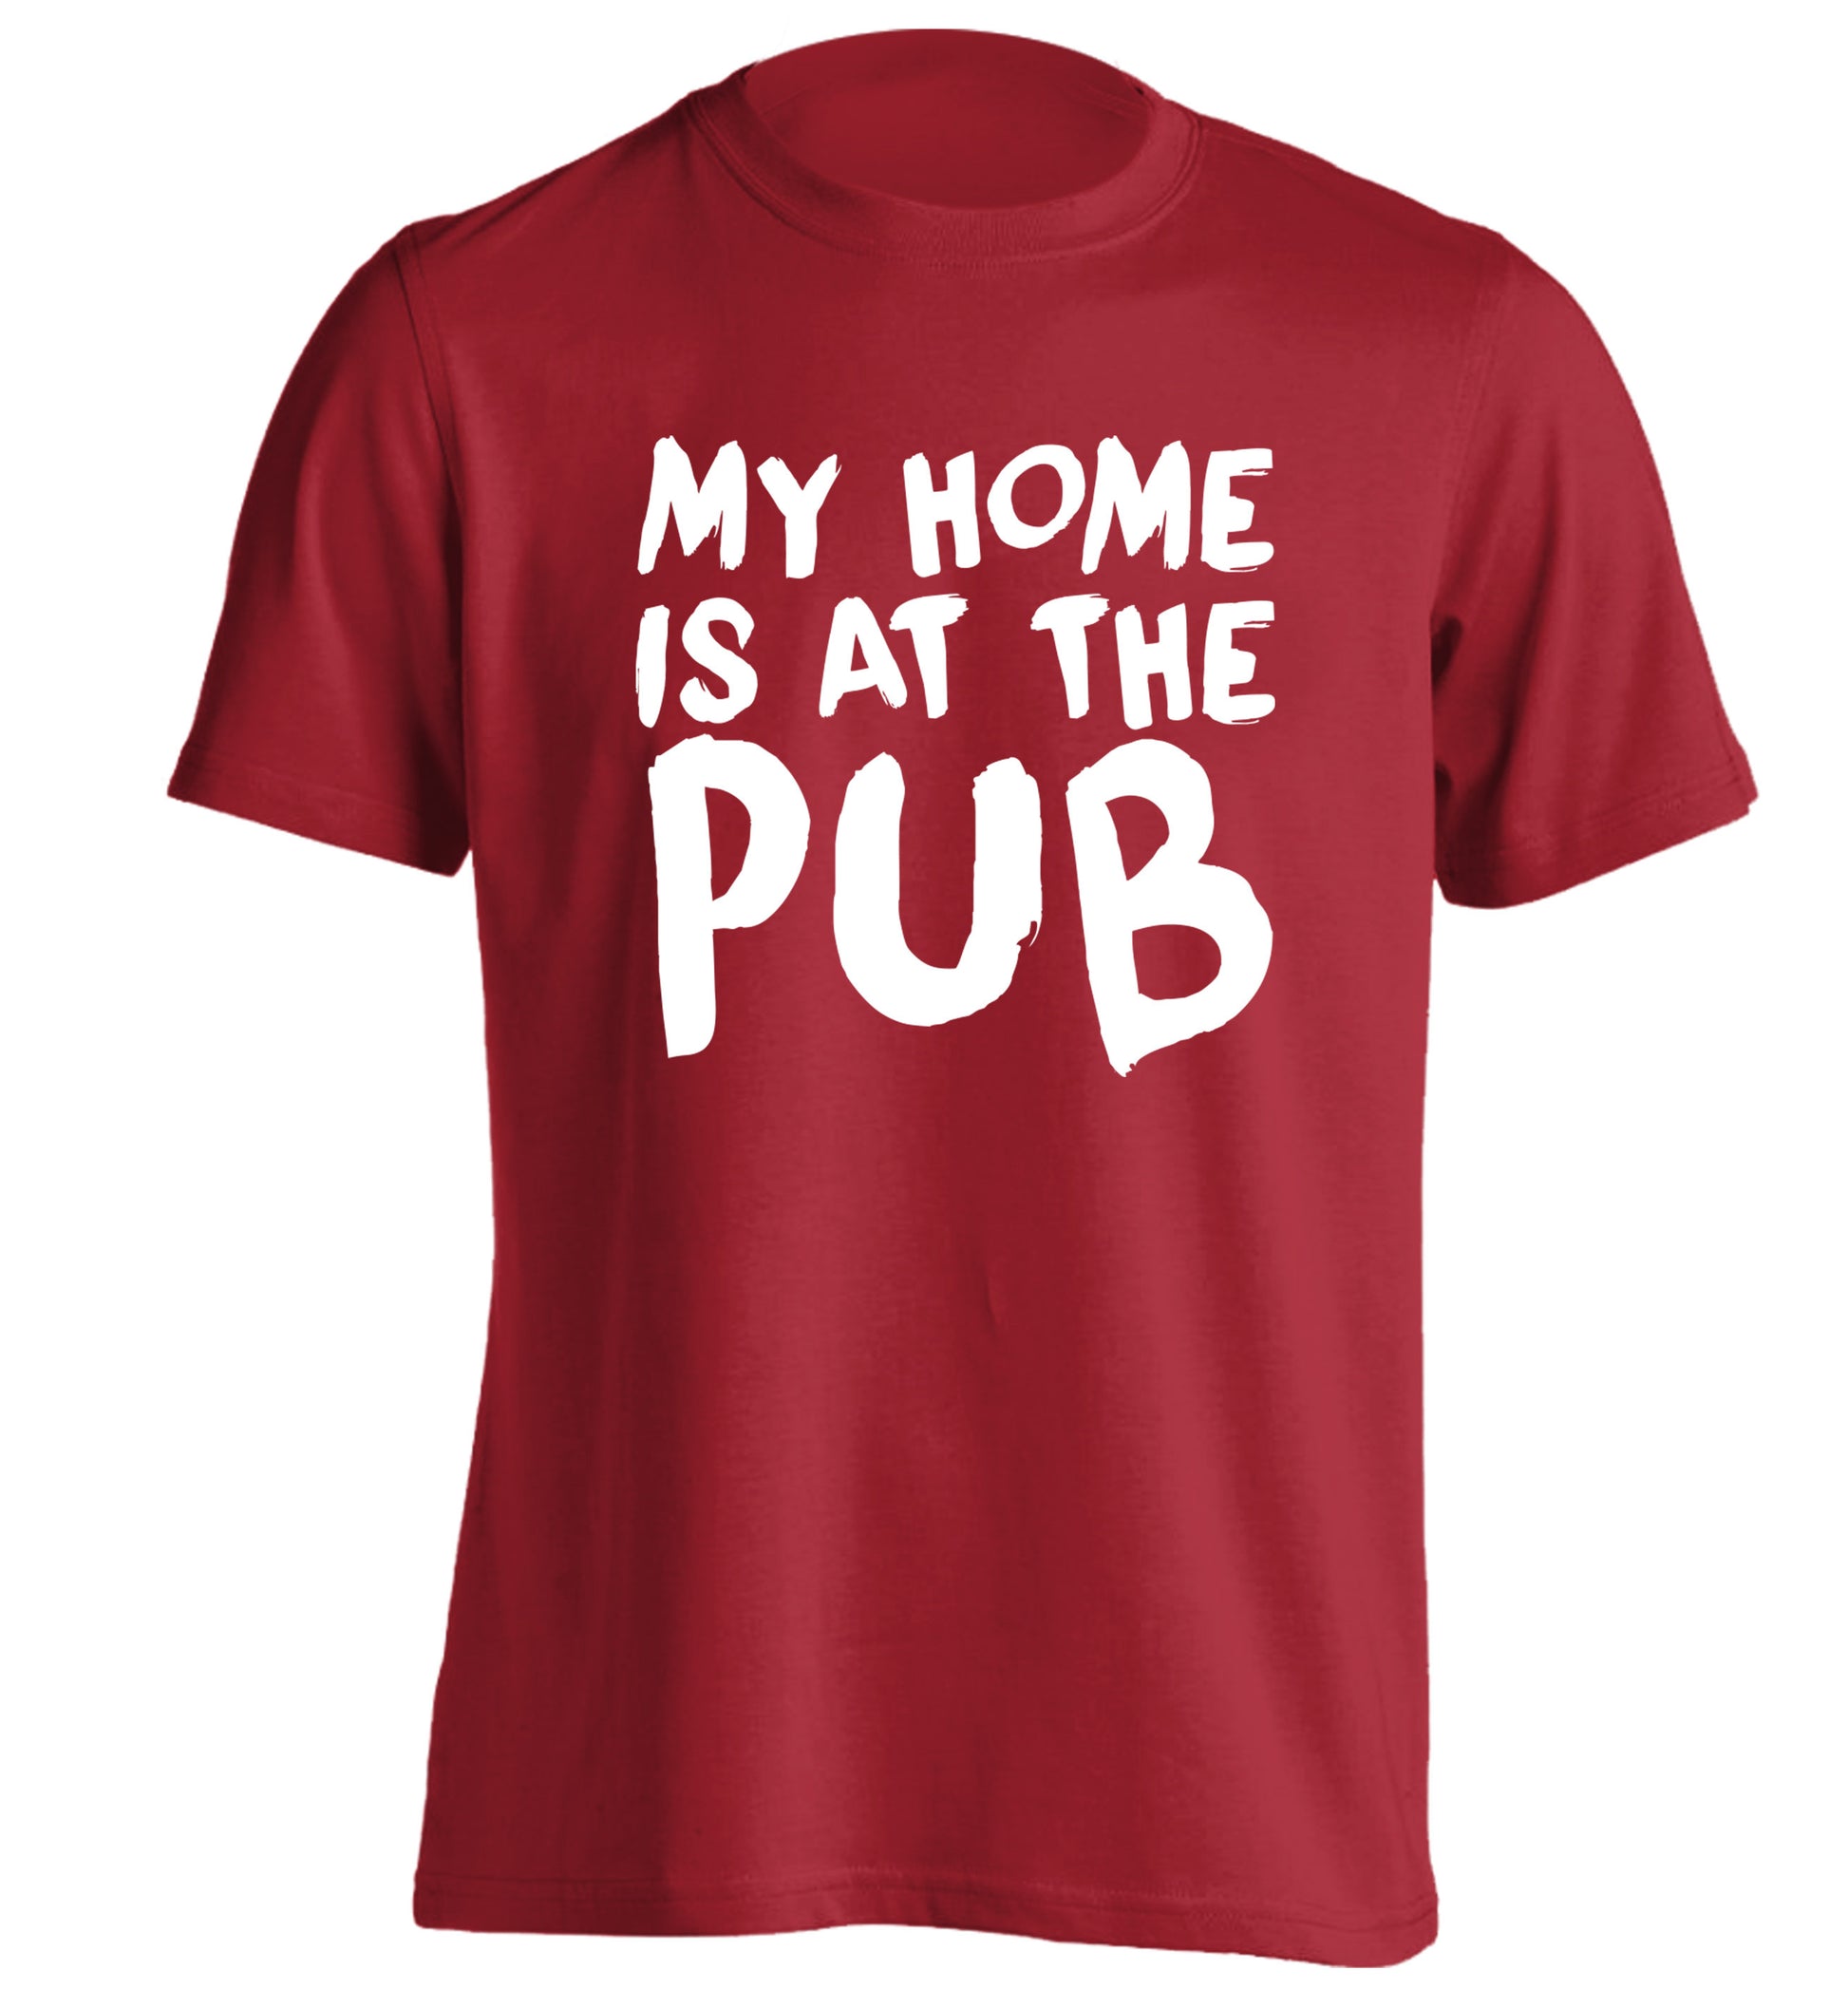 My home is at the pub adults unisex red Tshirt 2XL